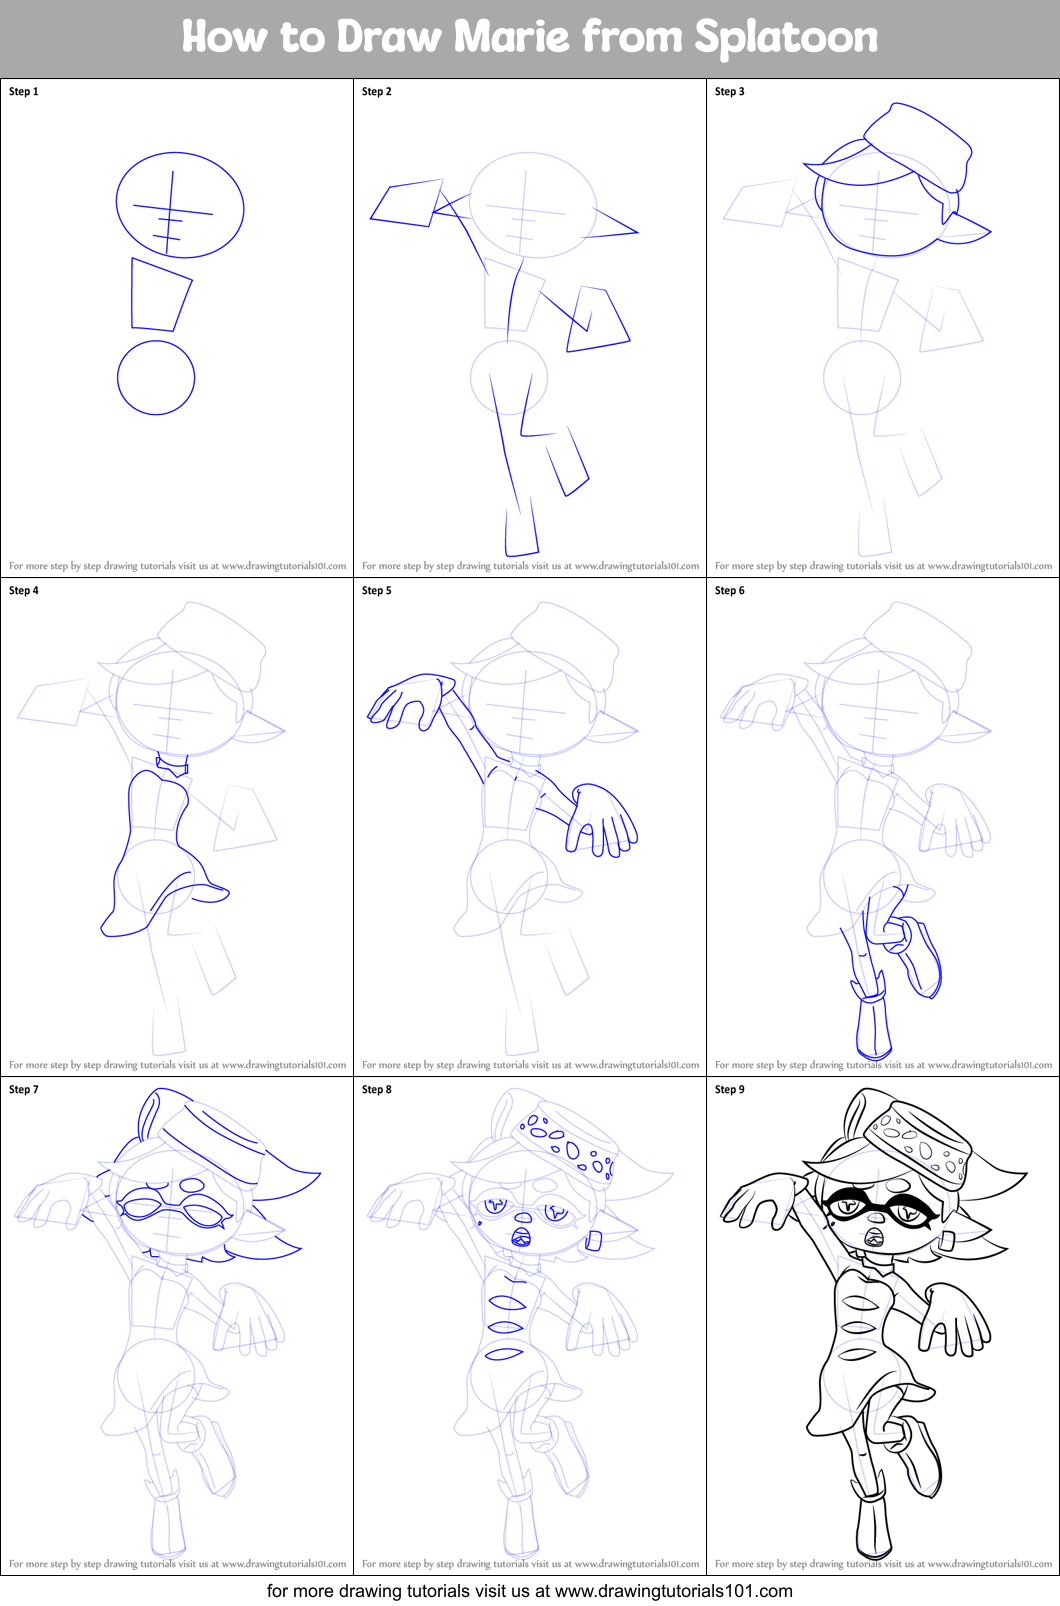 How to Draw Marie from Splatoon printable step by step drawing sheet